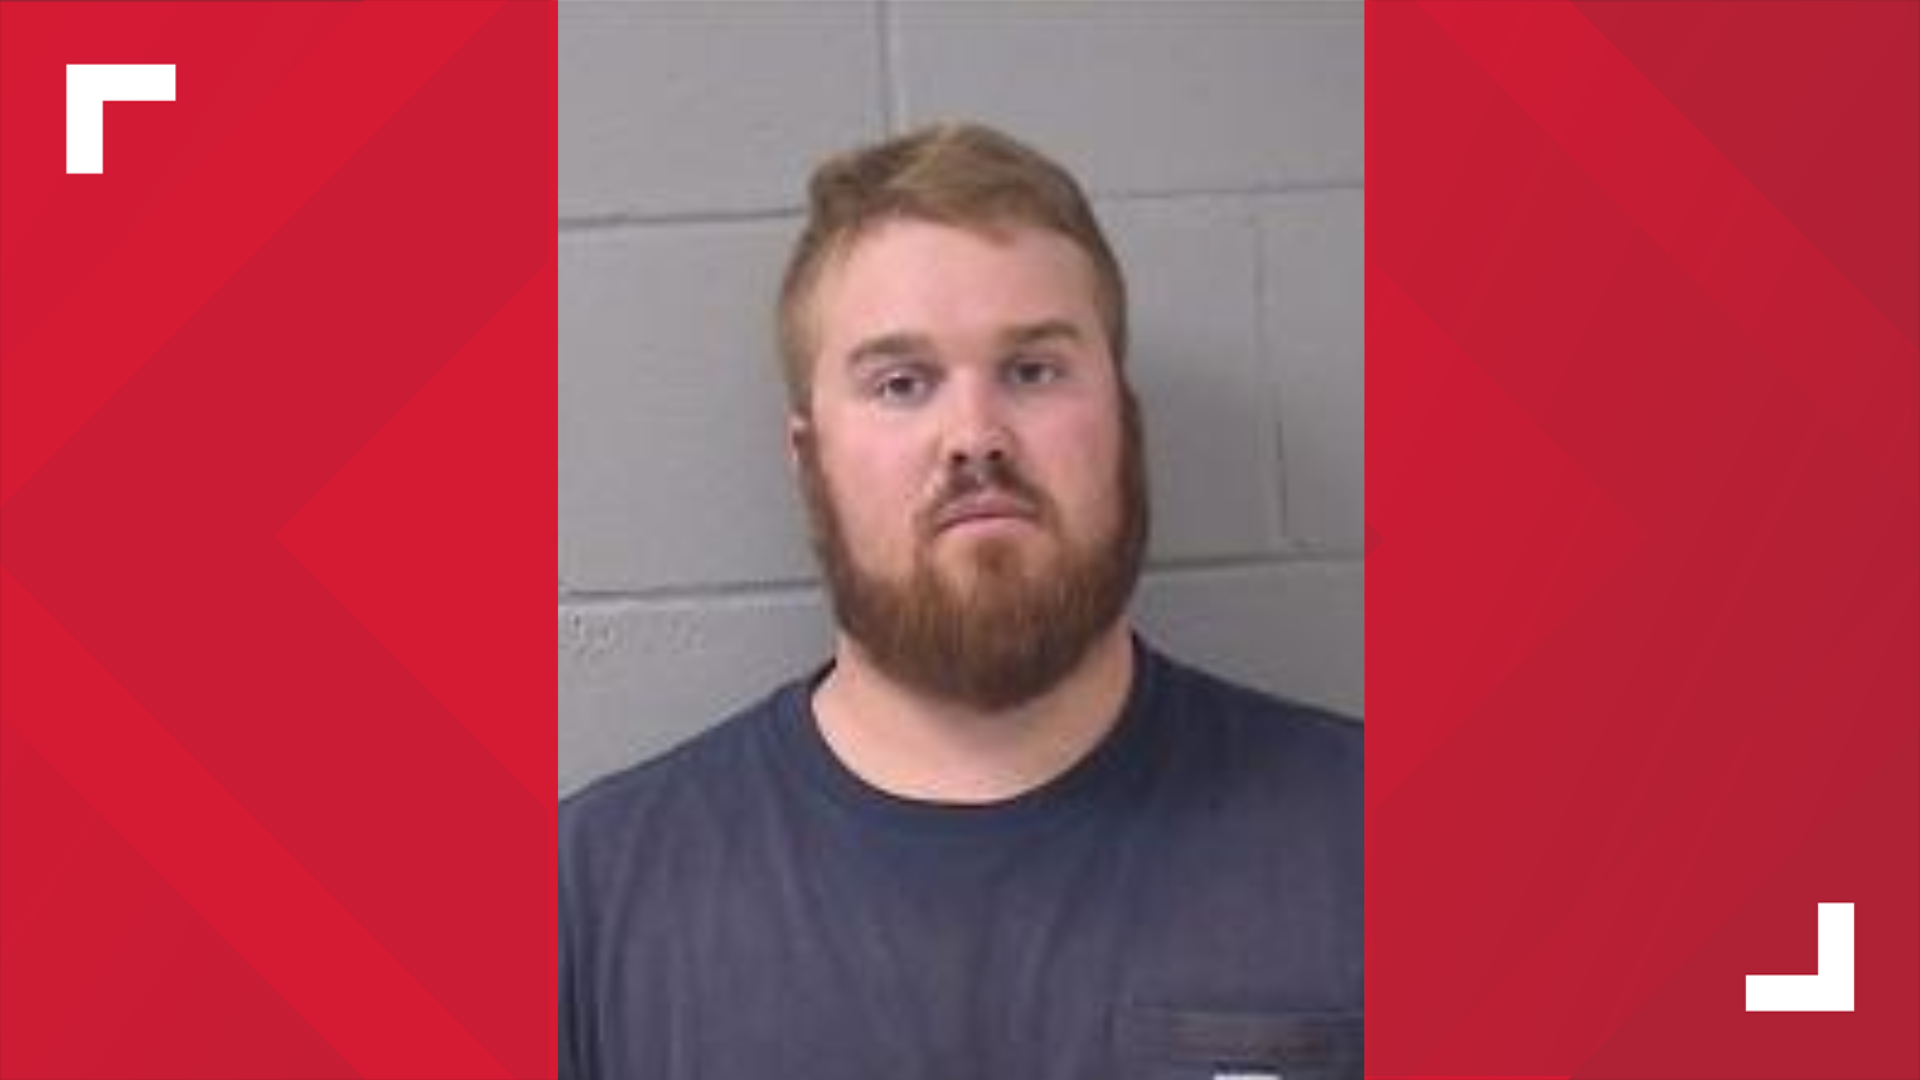 Nicholas Edward Cox, 22, is charged with first-degree murder and child endangerment causing death. Authorities booked Cox into the Hardin County Jail Tuesday.